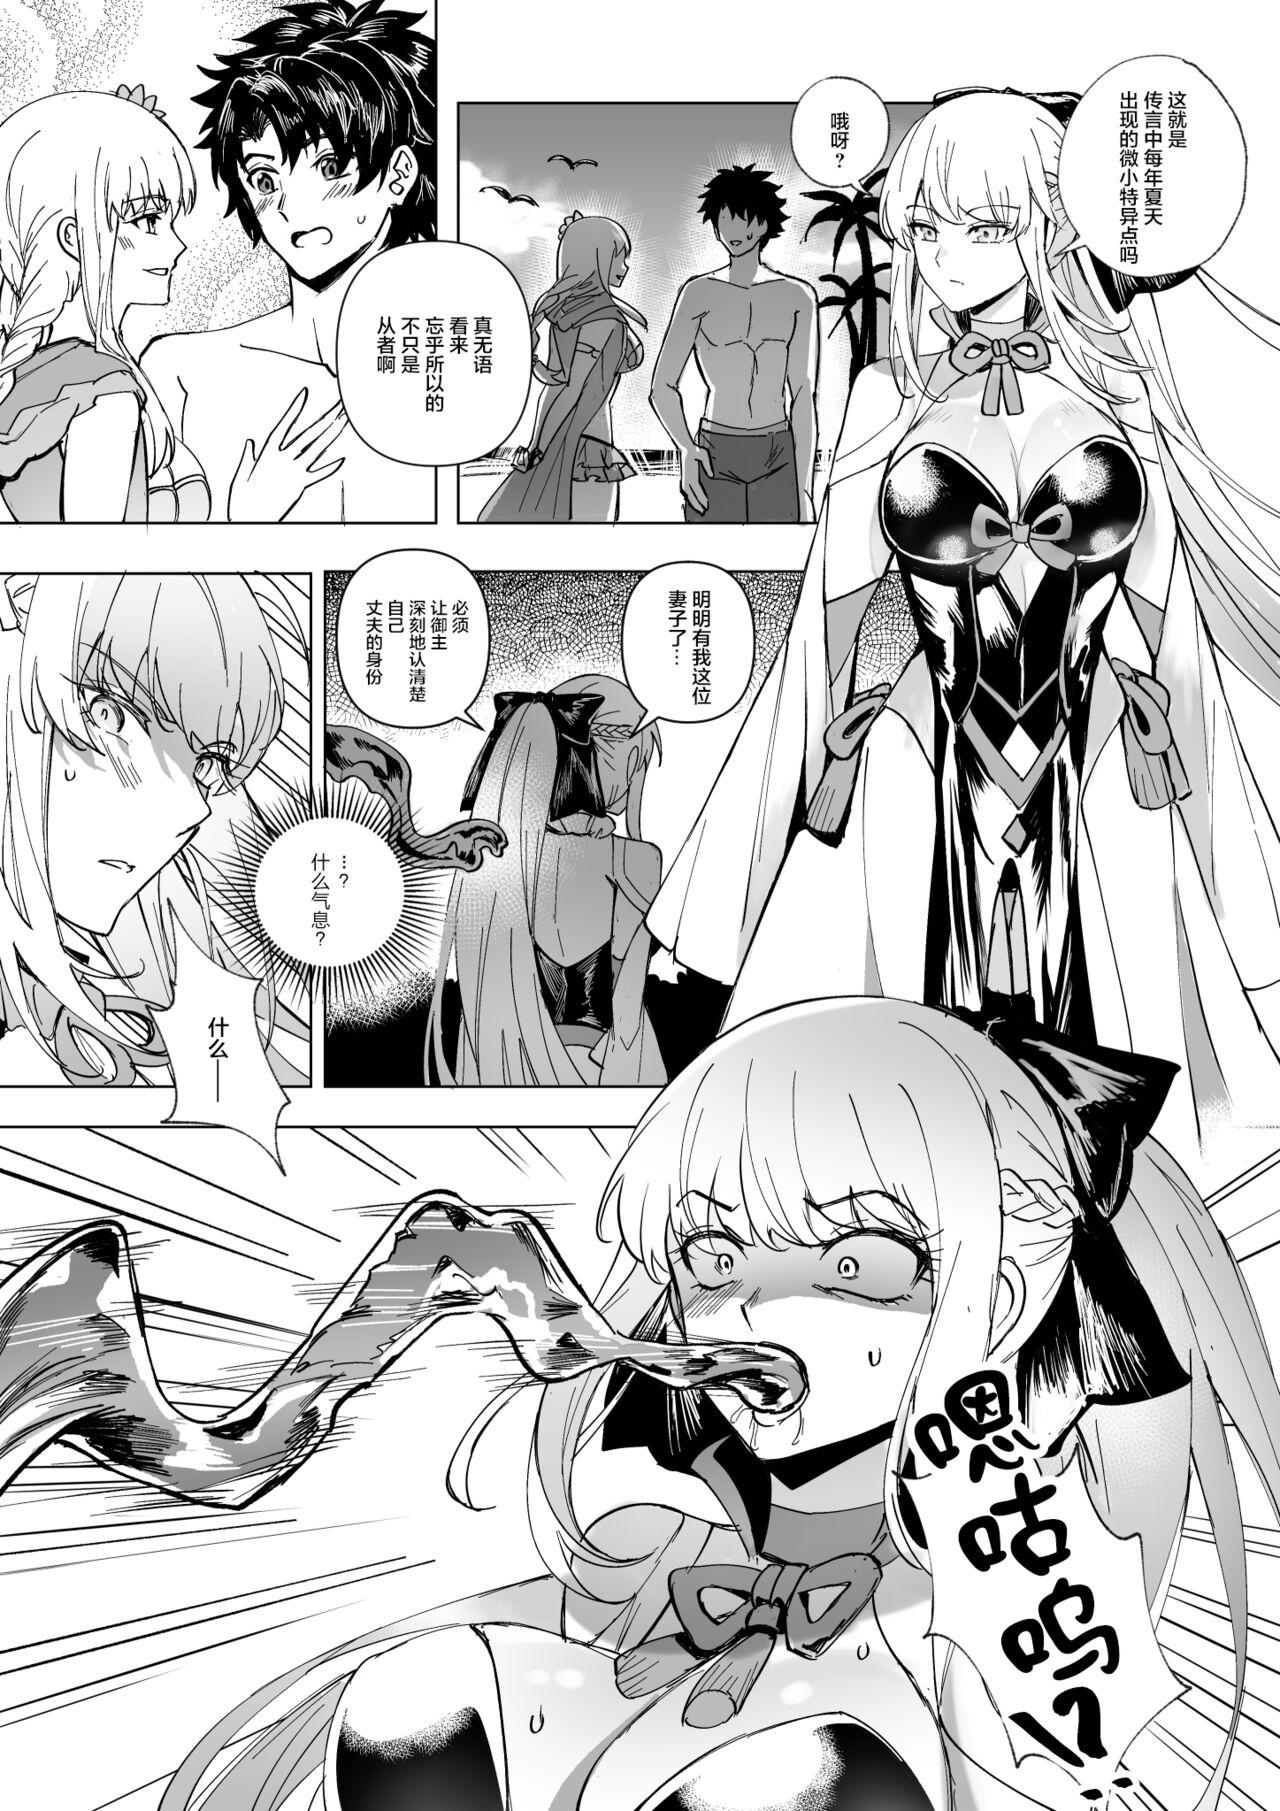 Japan FGO モルガン&水着カーマ憑依 - Fate grand order Hot Girl Pussy - Page 2